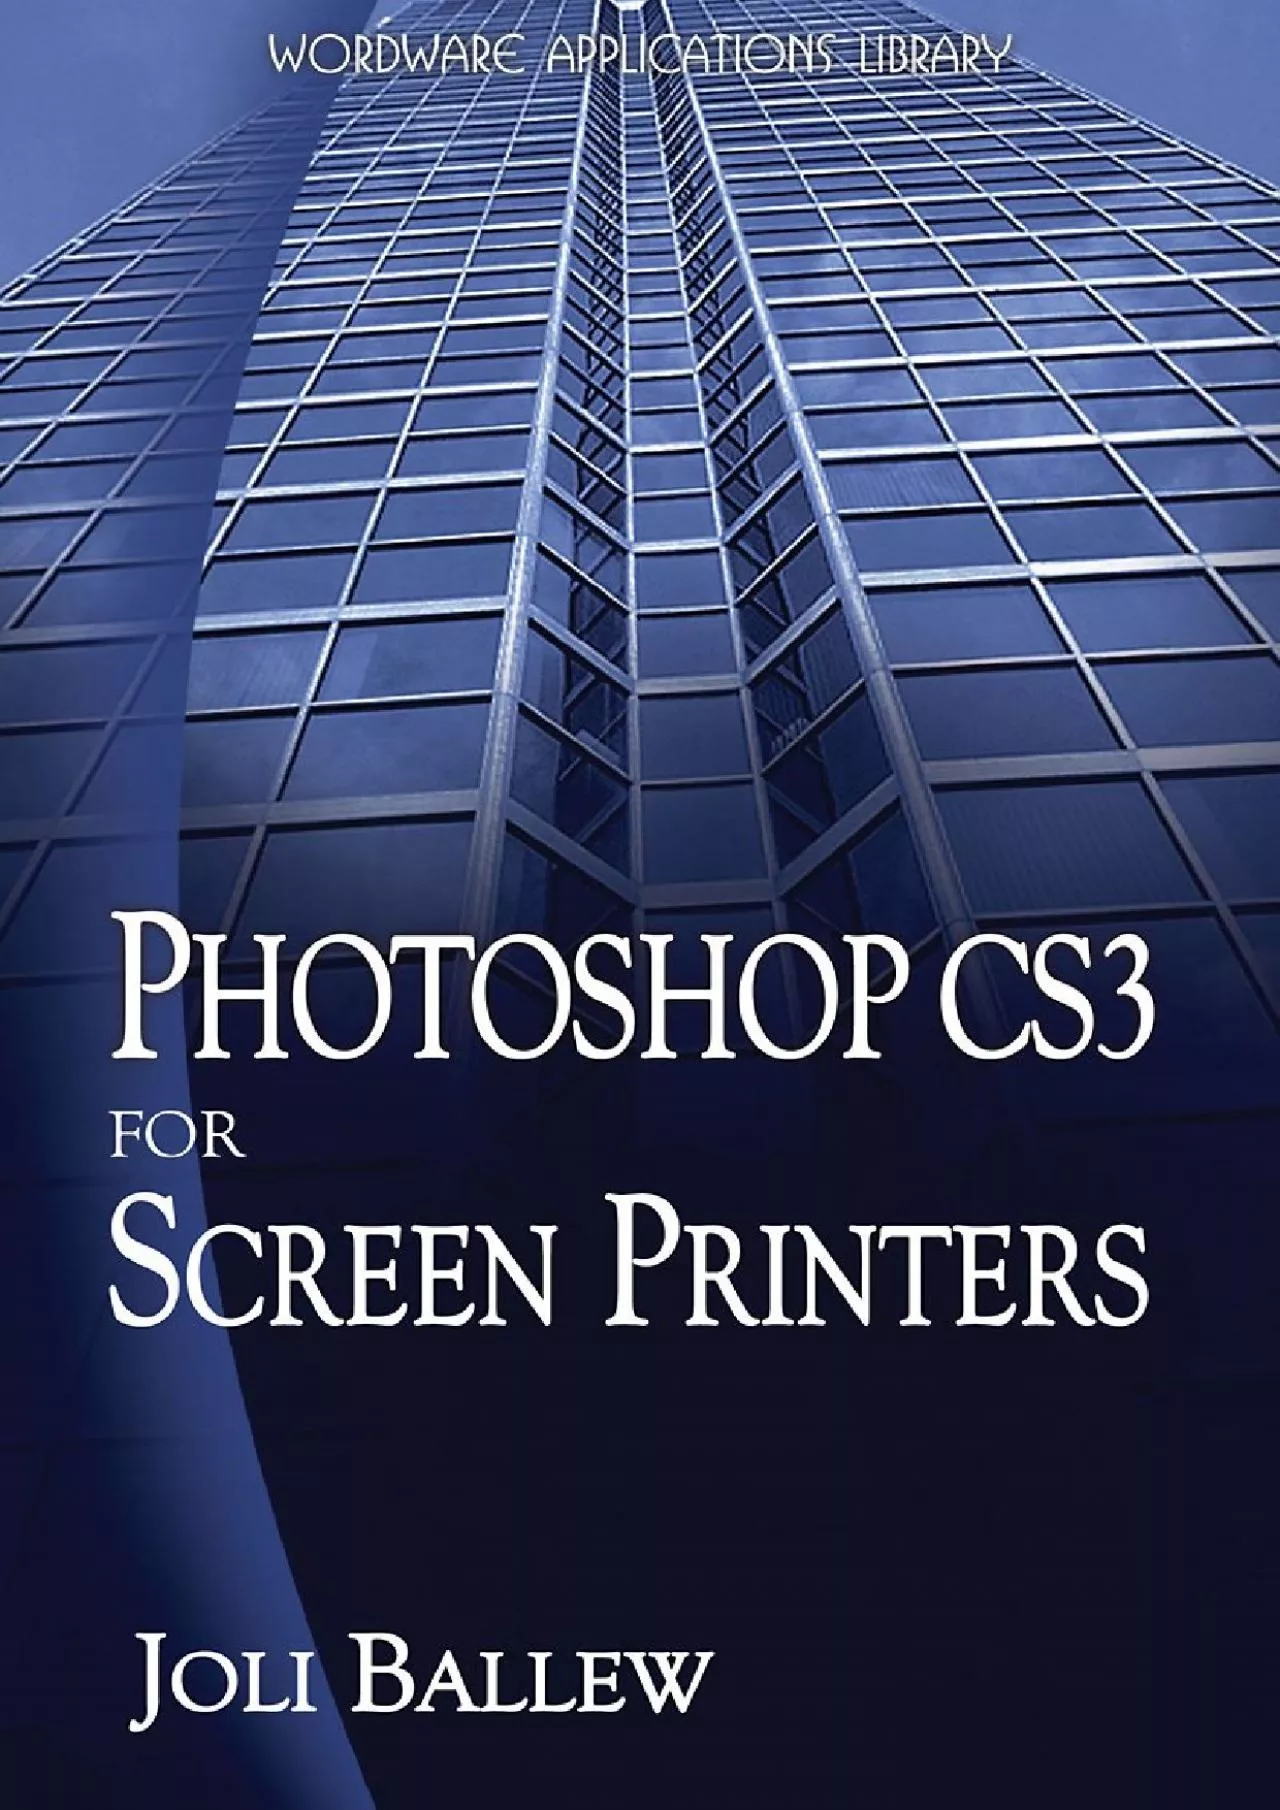 (DOWNLOAD)-PhotoShop CS3 for Screen Printers (Wordware Applications Library)